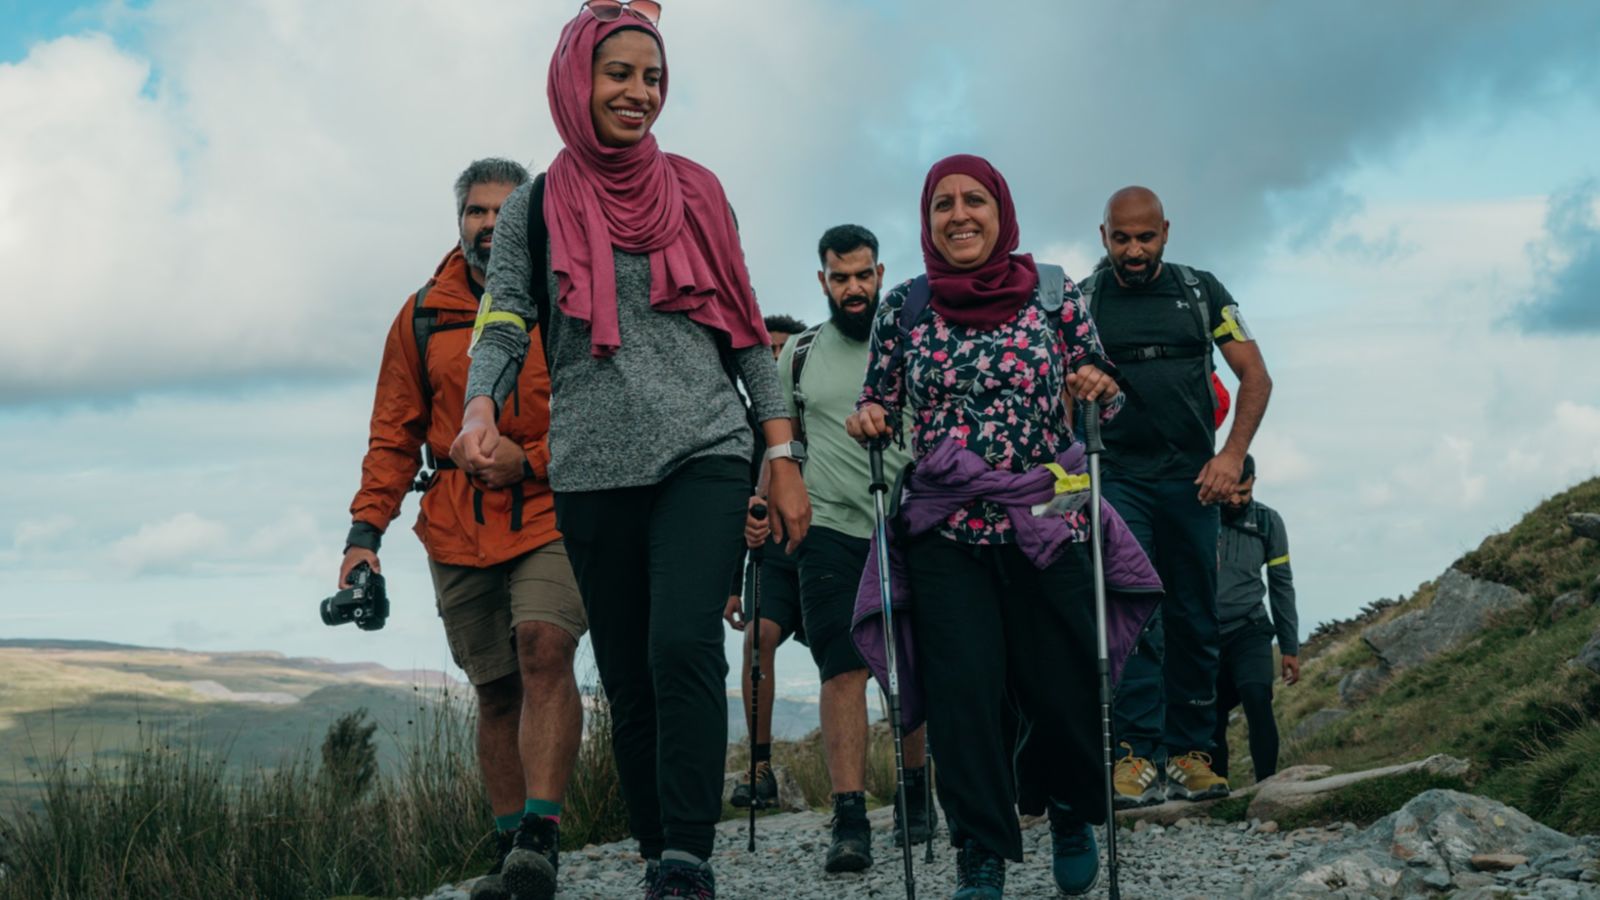 'People want to connect with one another' - 300 Muslim hikers climb Yr Wyddfa | ITV News - ITV News